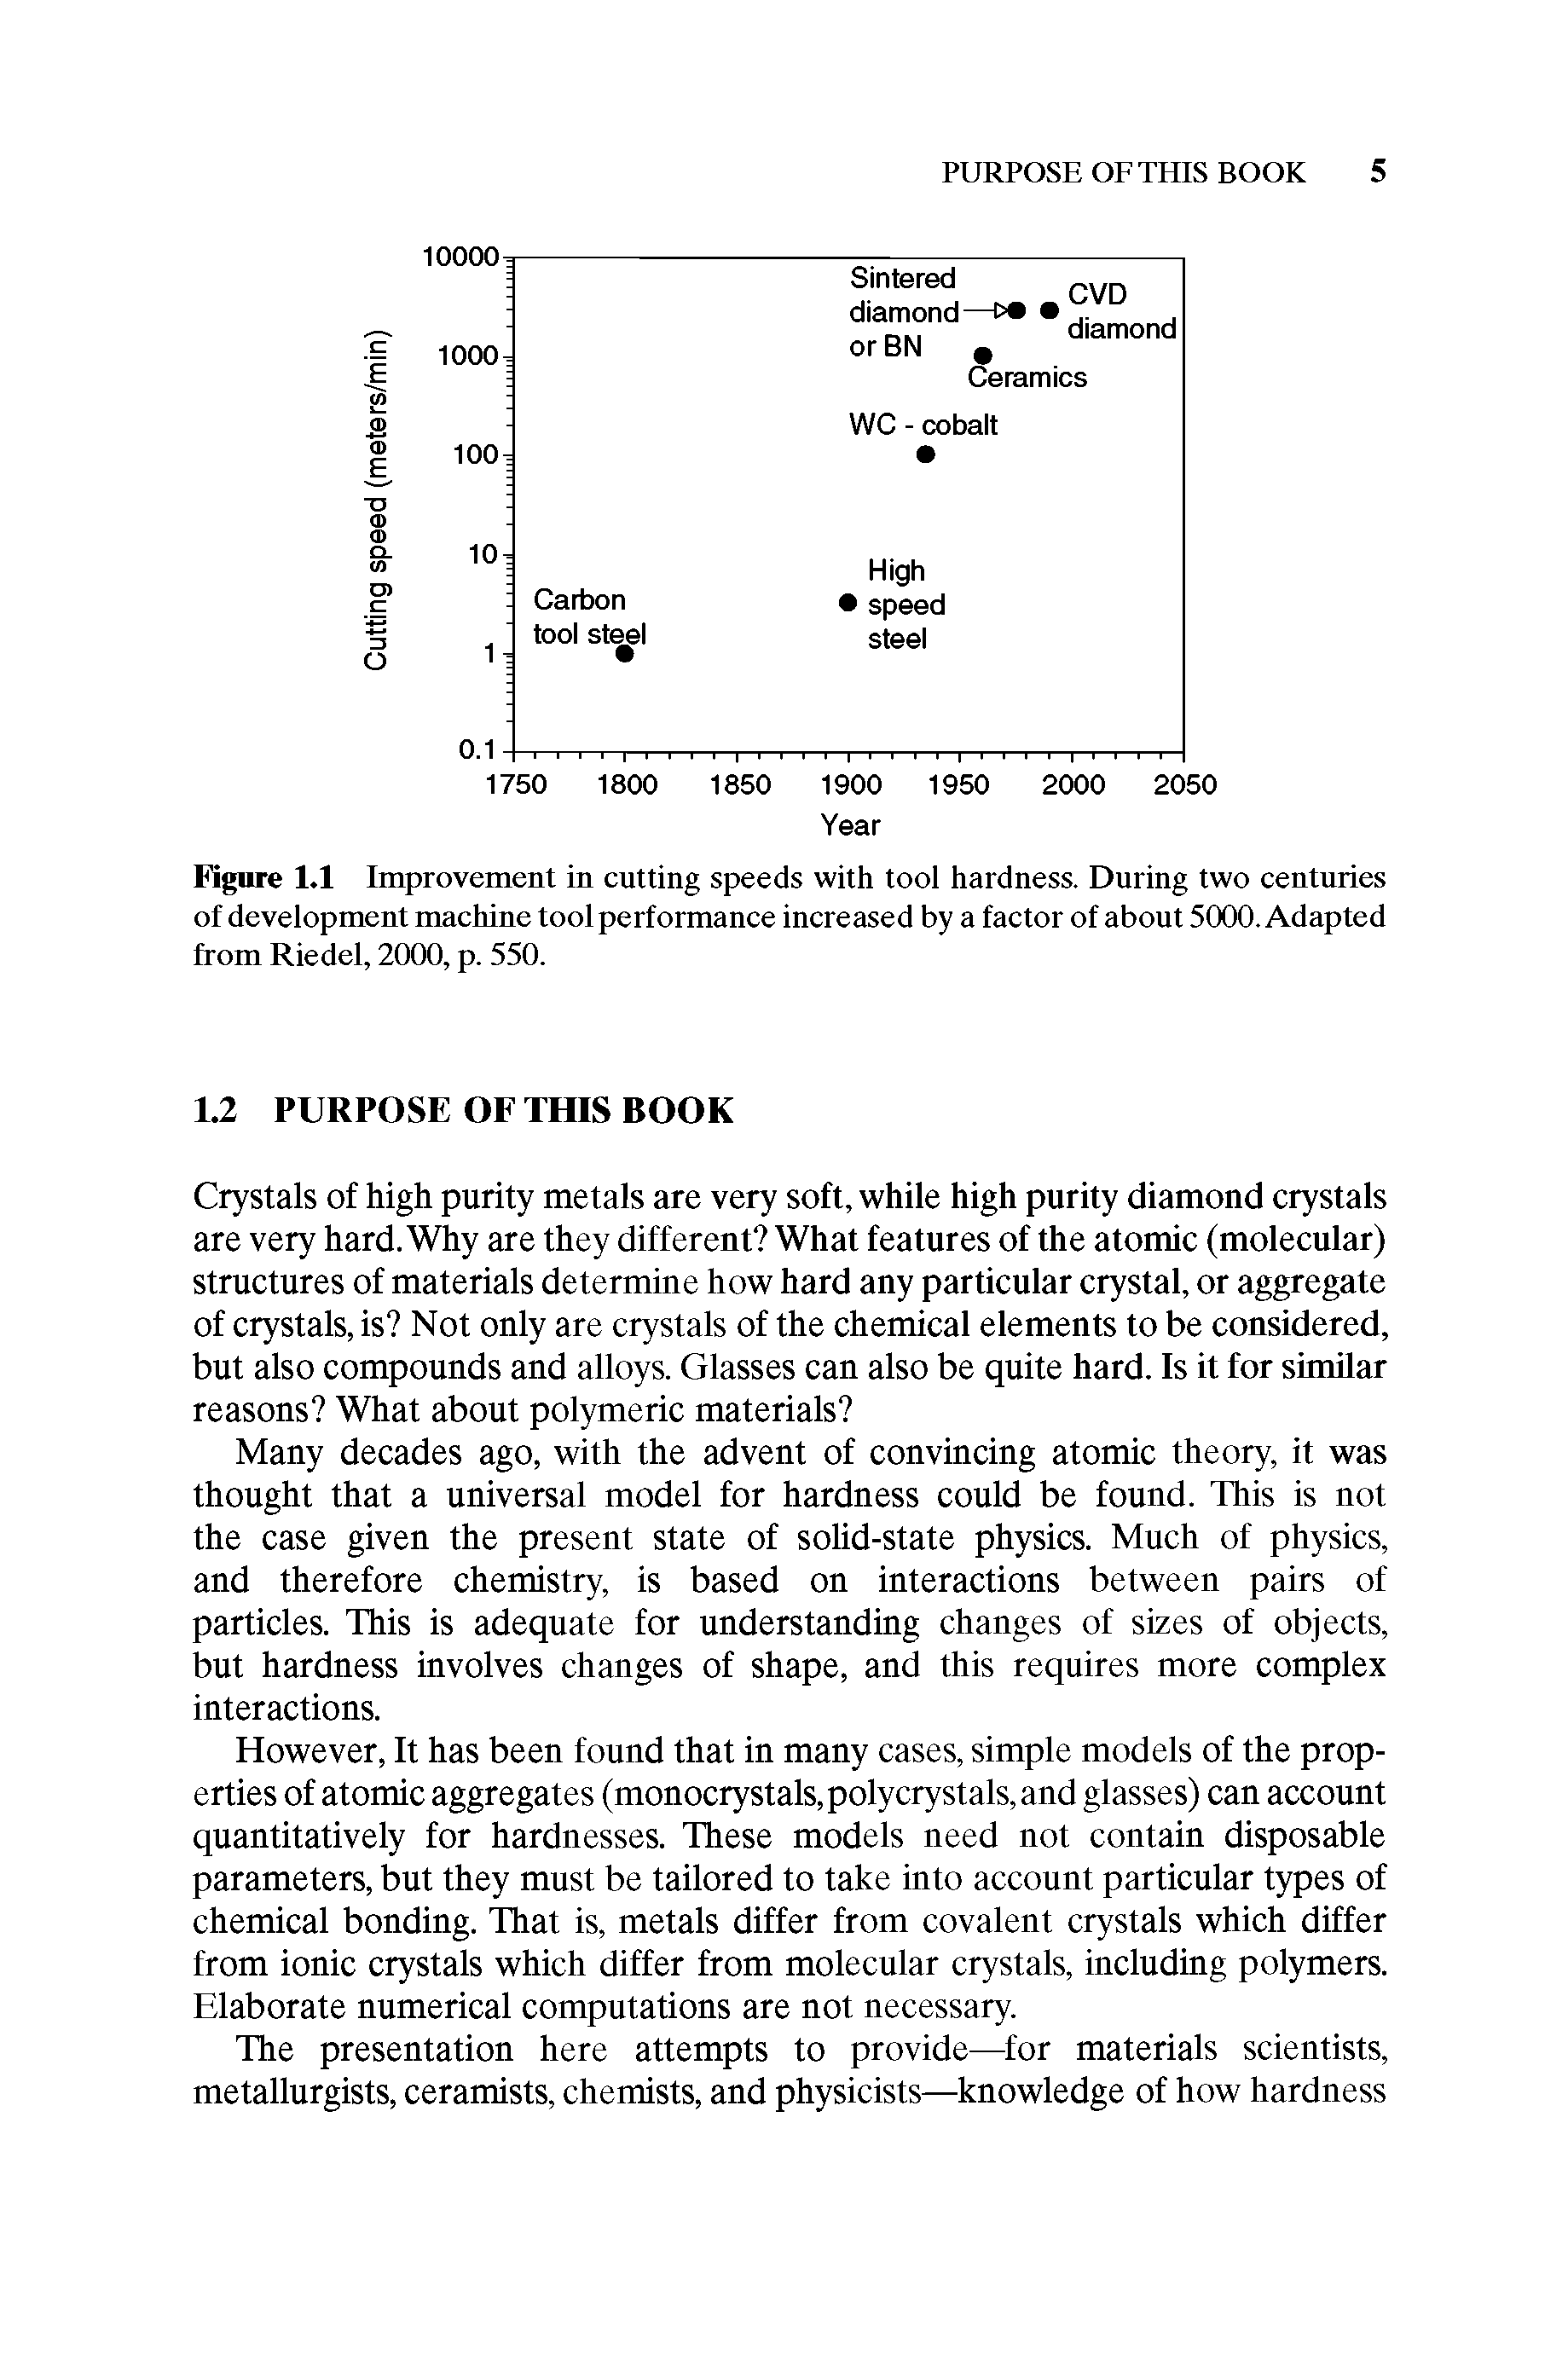 Figure 1.1 Improvement in cutting speeds with tool hardness. During two centuries of development machine tool performance increased by a factor of about 5000. Adapted from Riedel, 2000, p. 550.